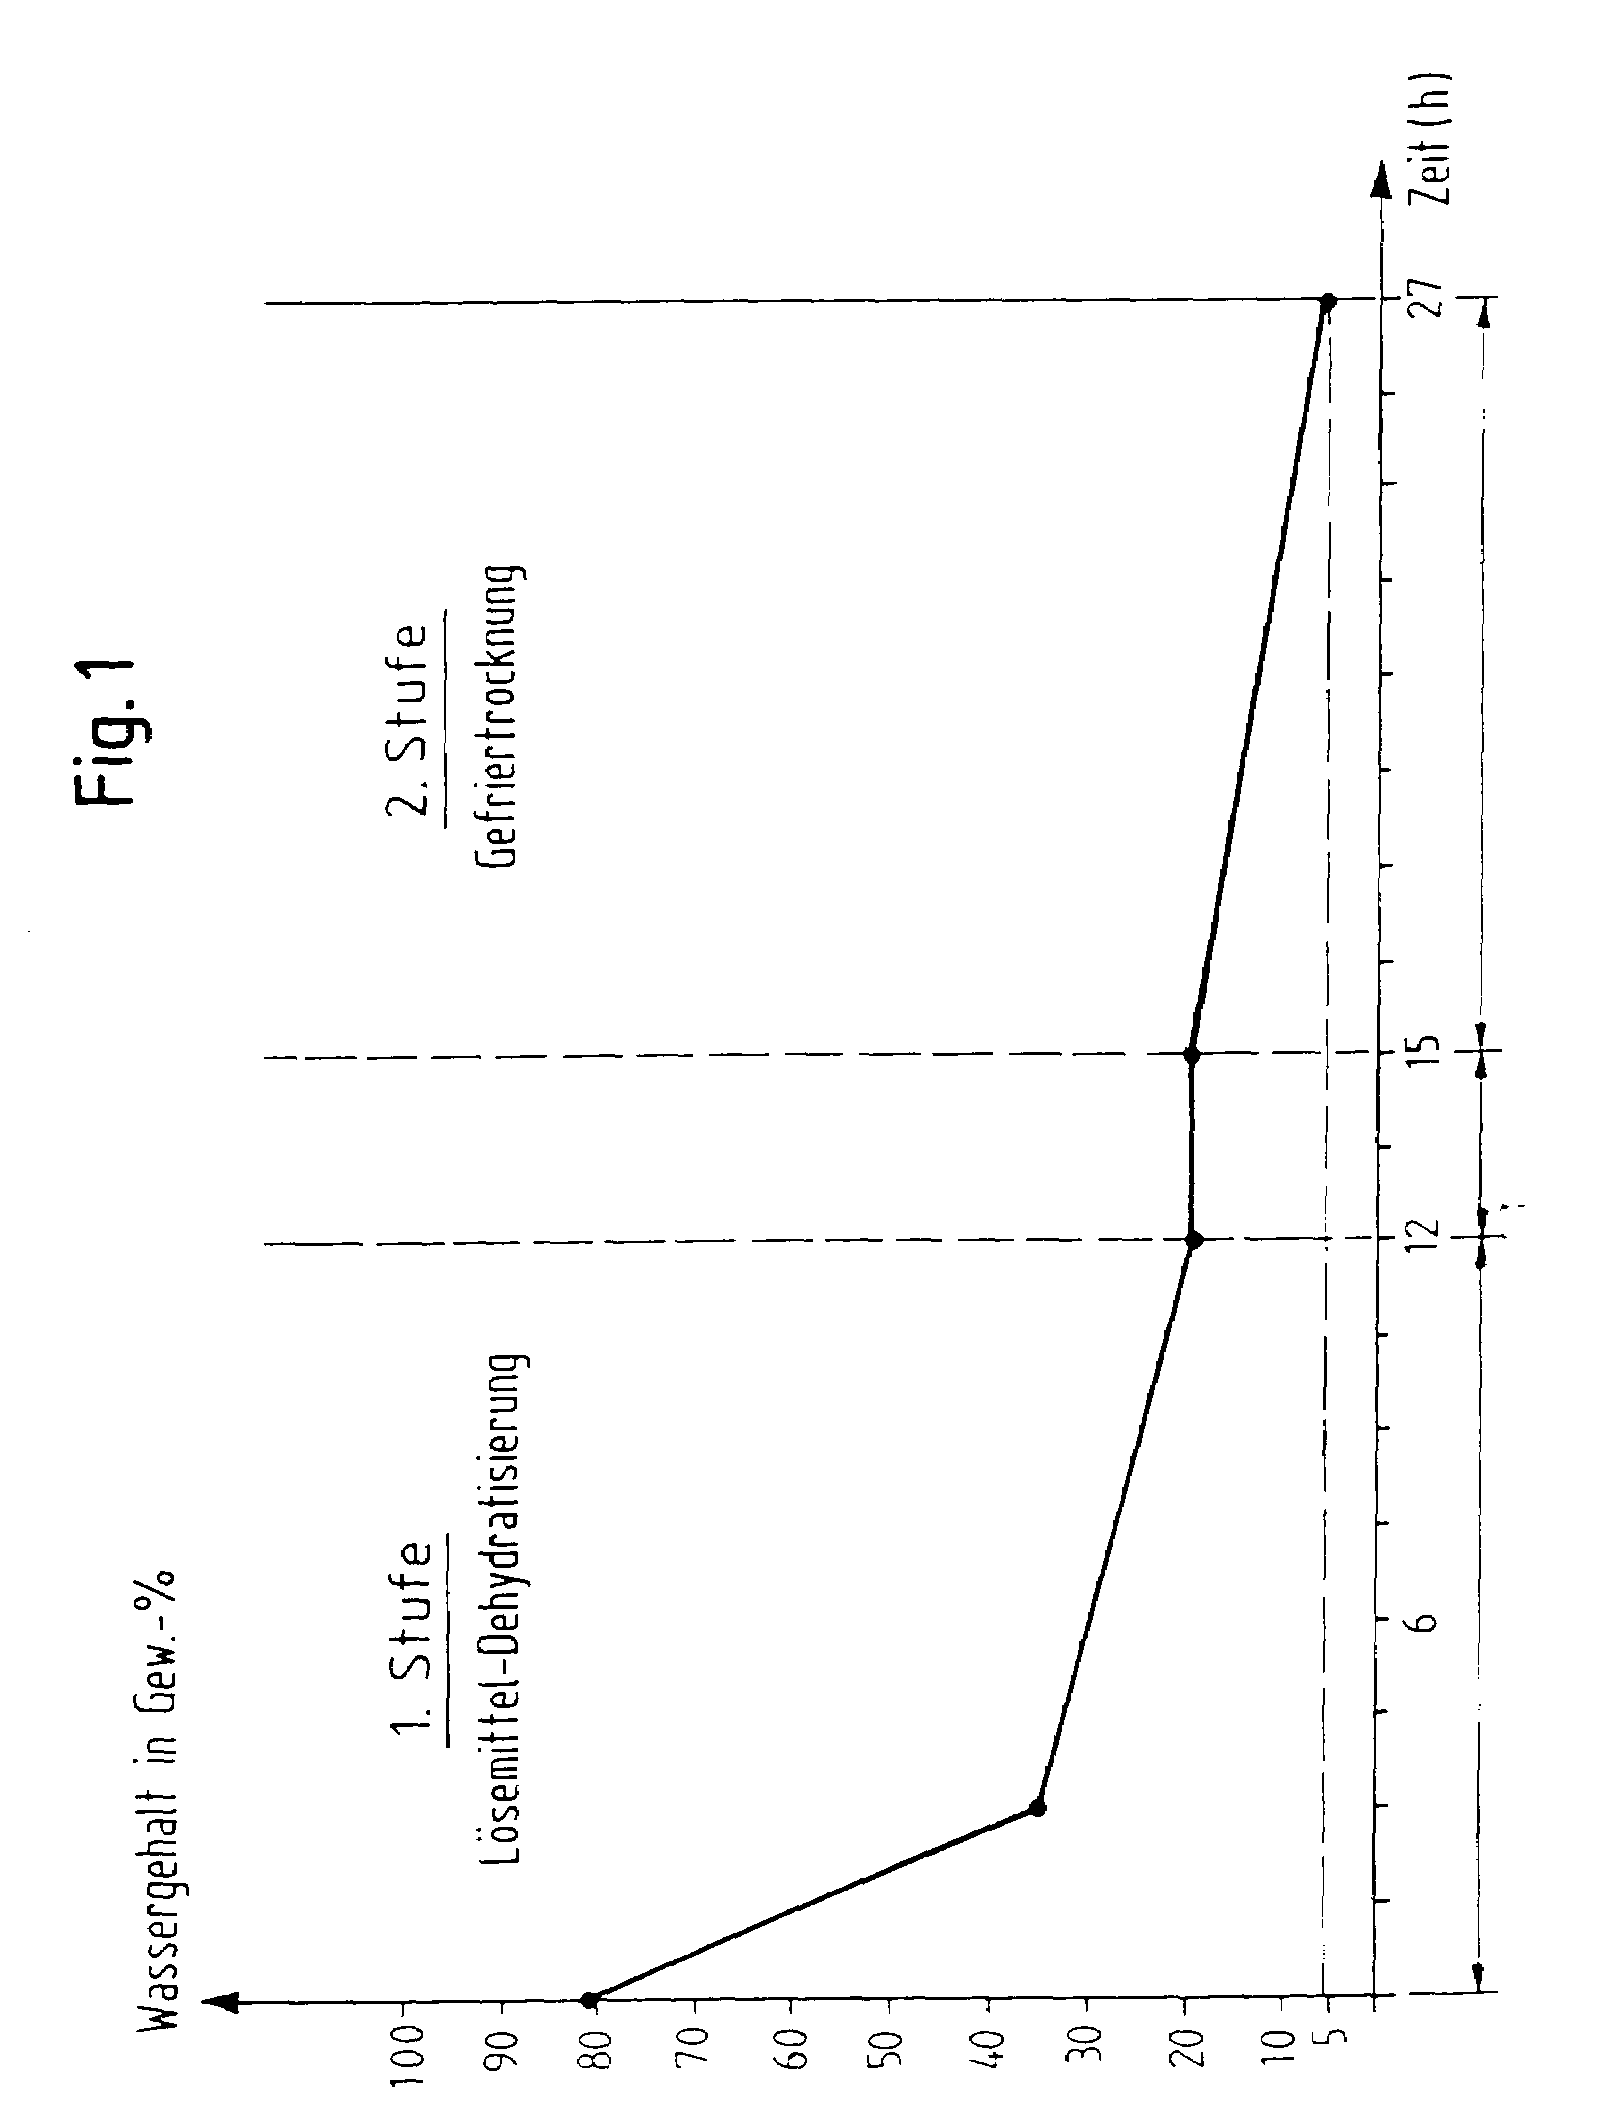 Method for dehydrating biological tissue for producing preserved transplants